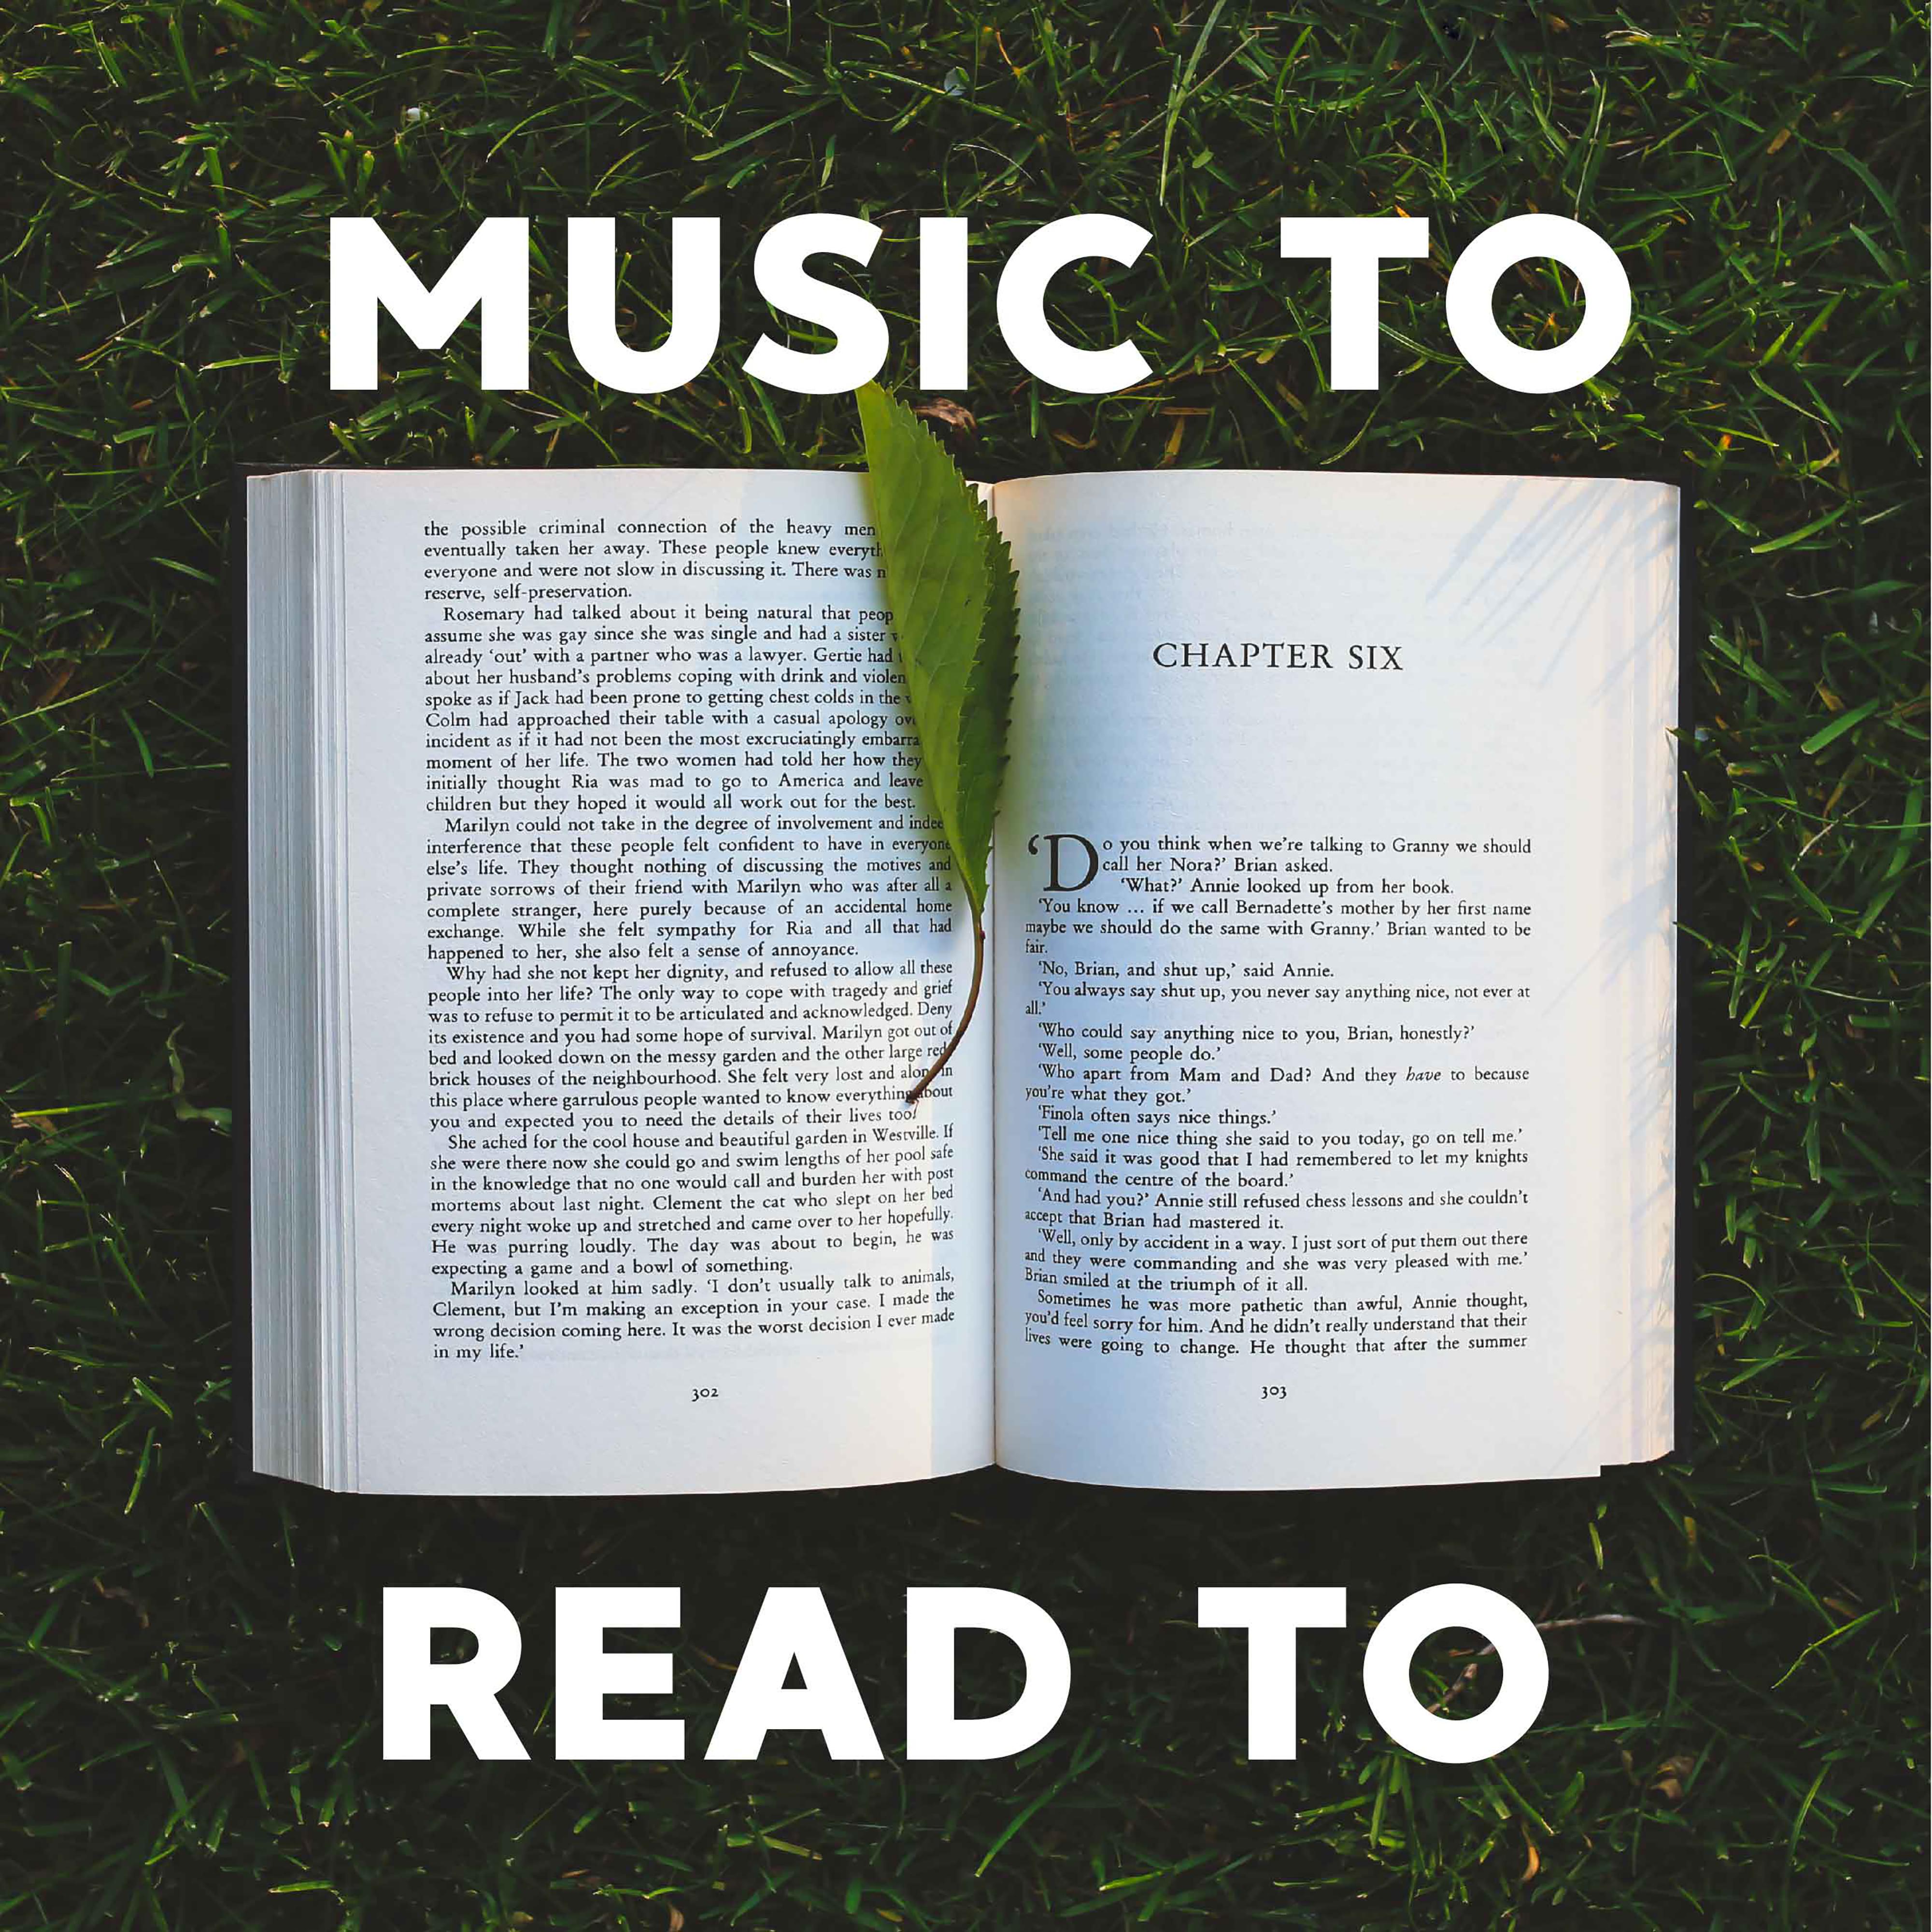 Music to Read to